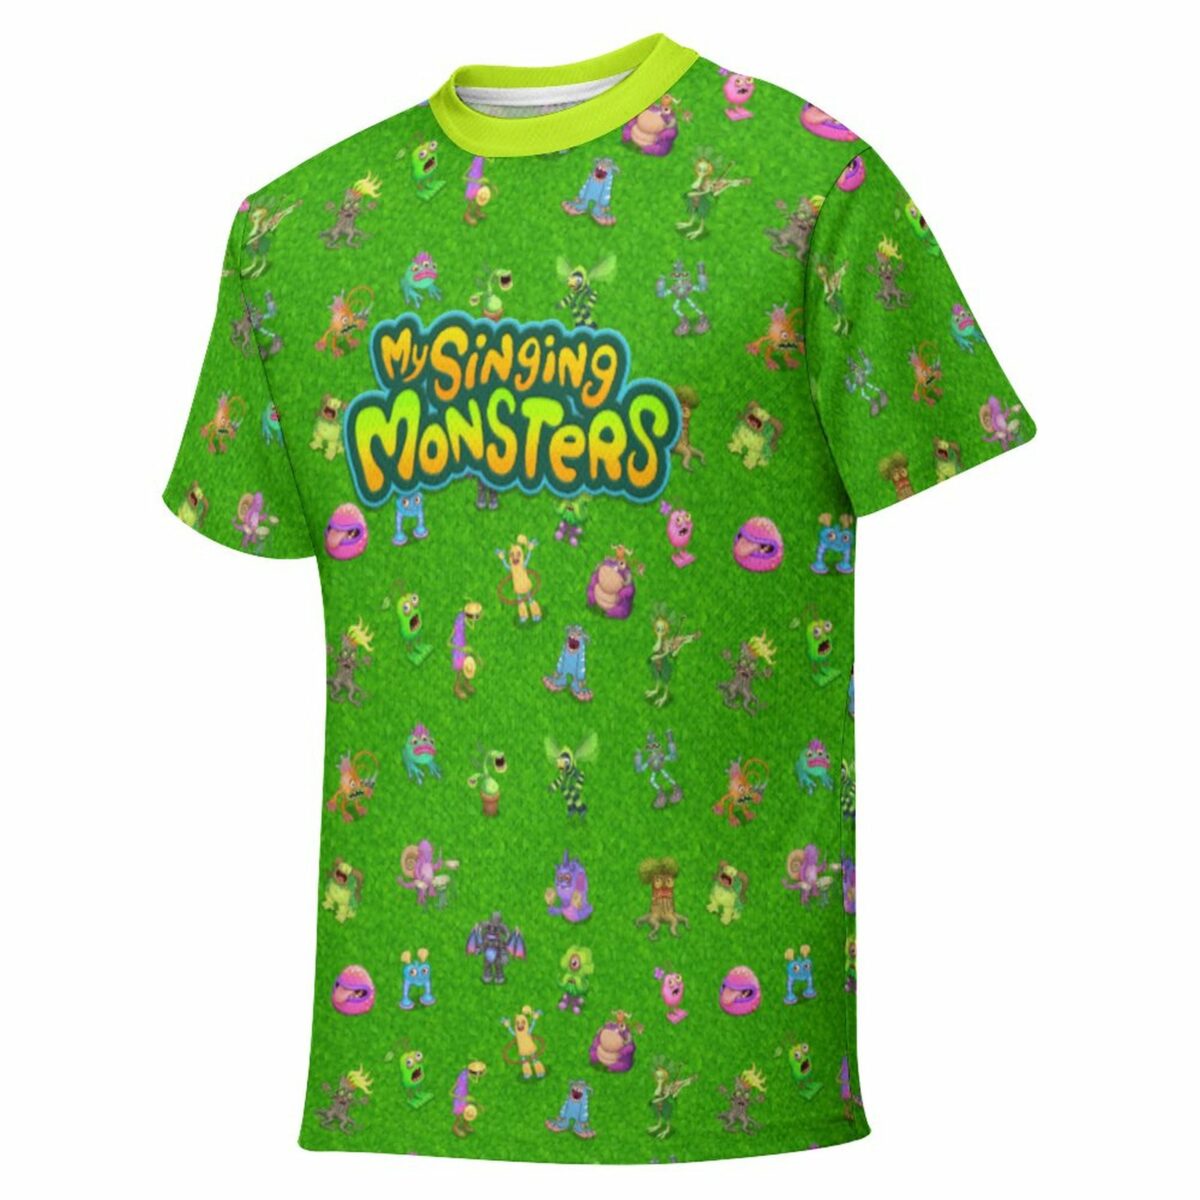 My Singing Monsters T-shirt for Teens (All-Over Printing) Cool Kiddo 12